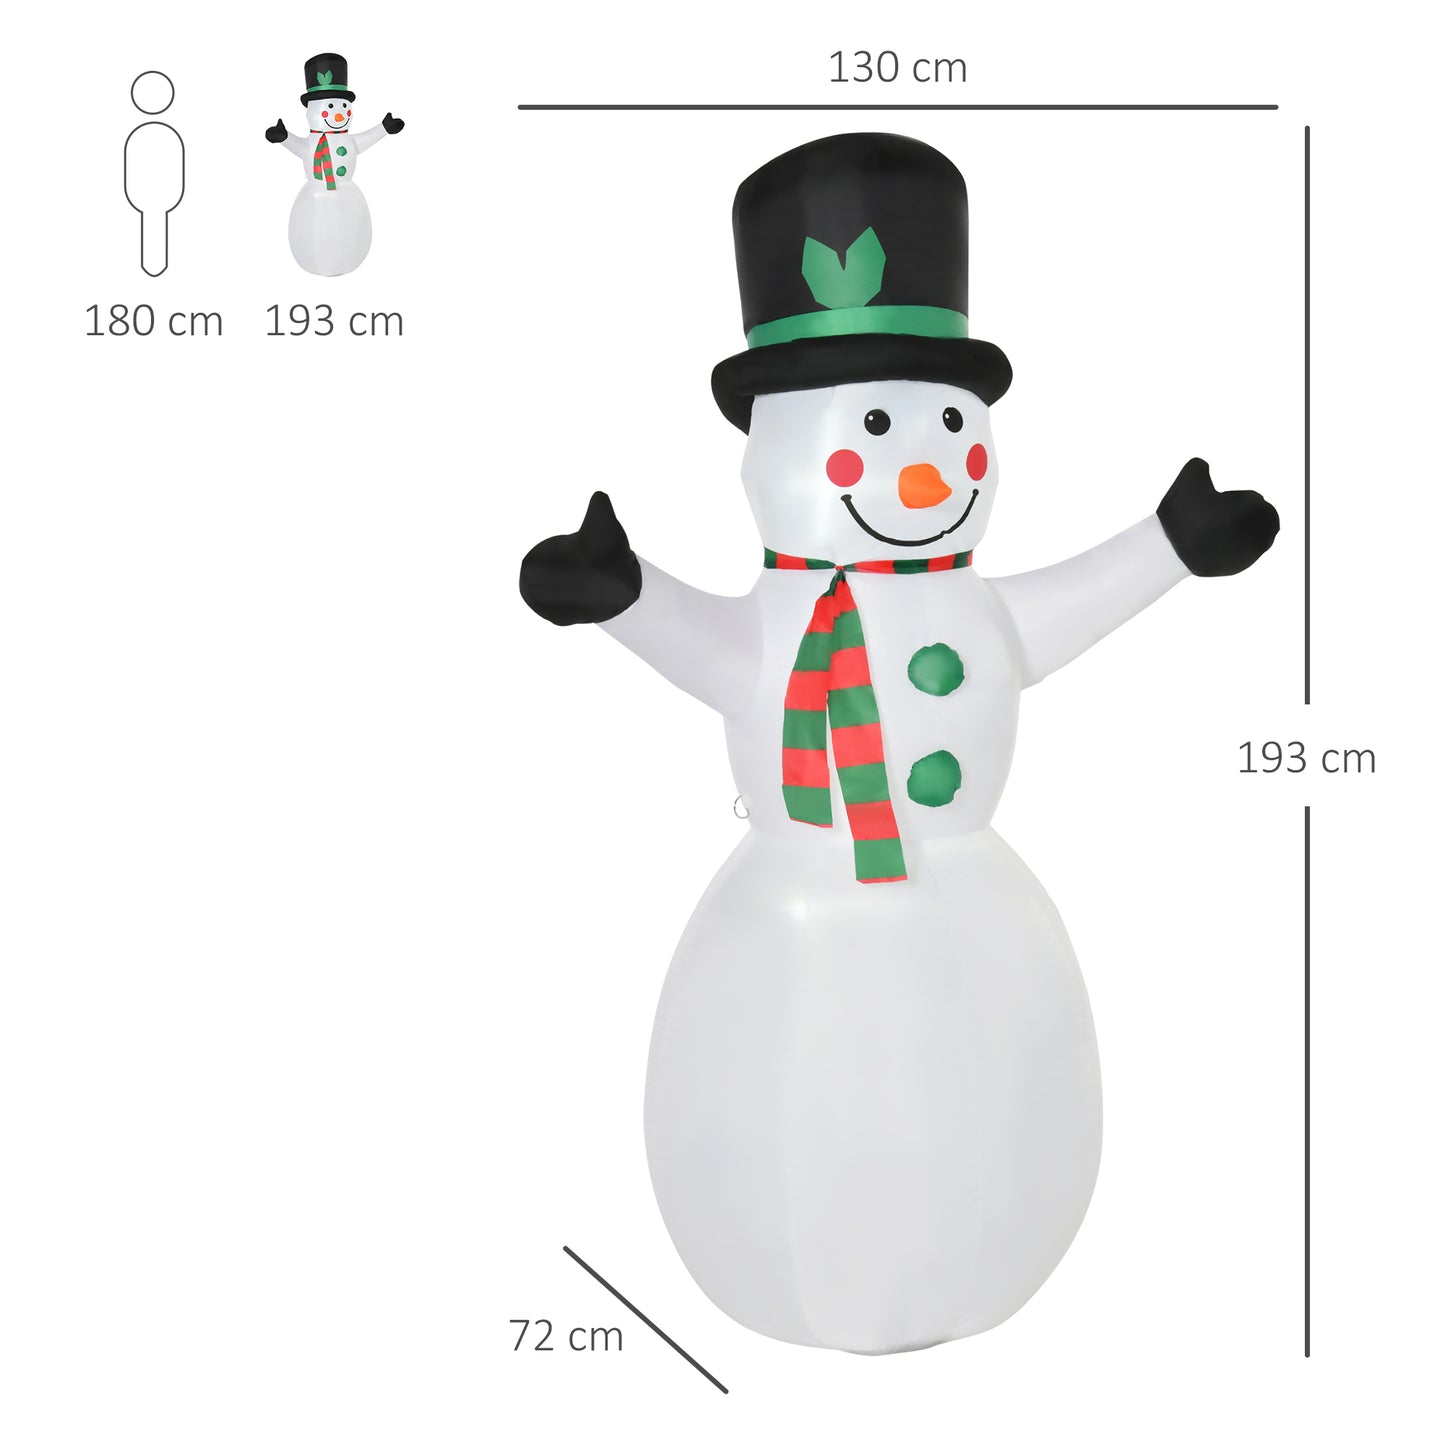 HOMCOM 1.8m Inflatable Snowman Decoration, Polyester-White